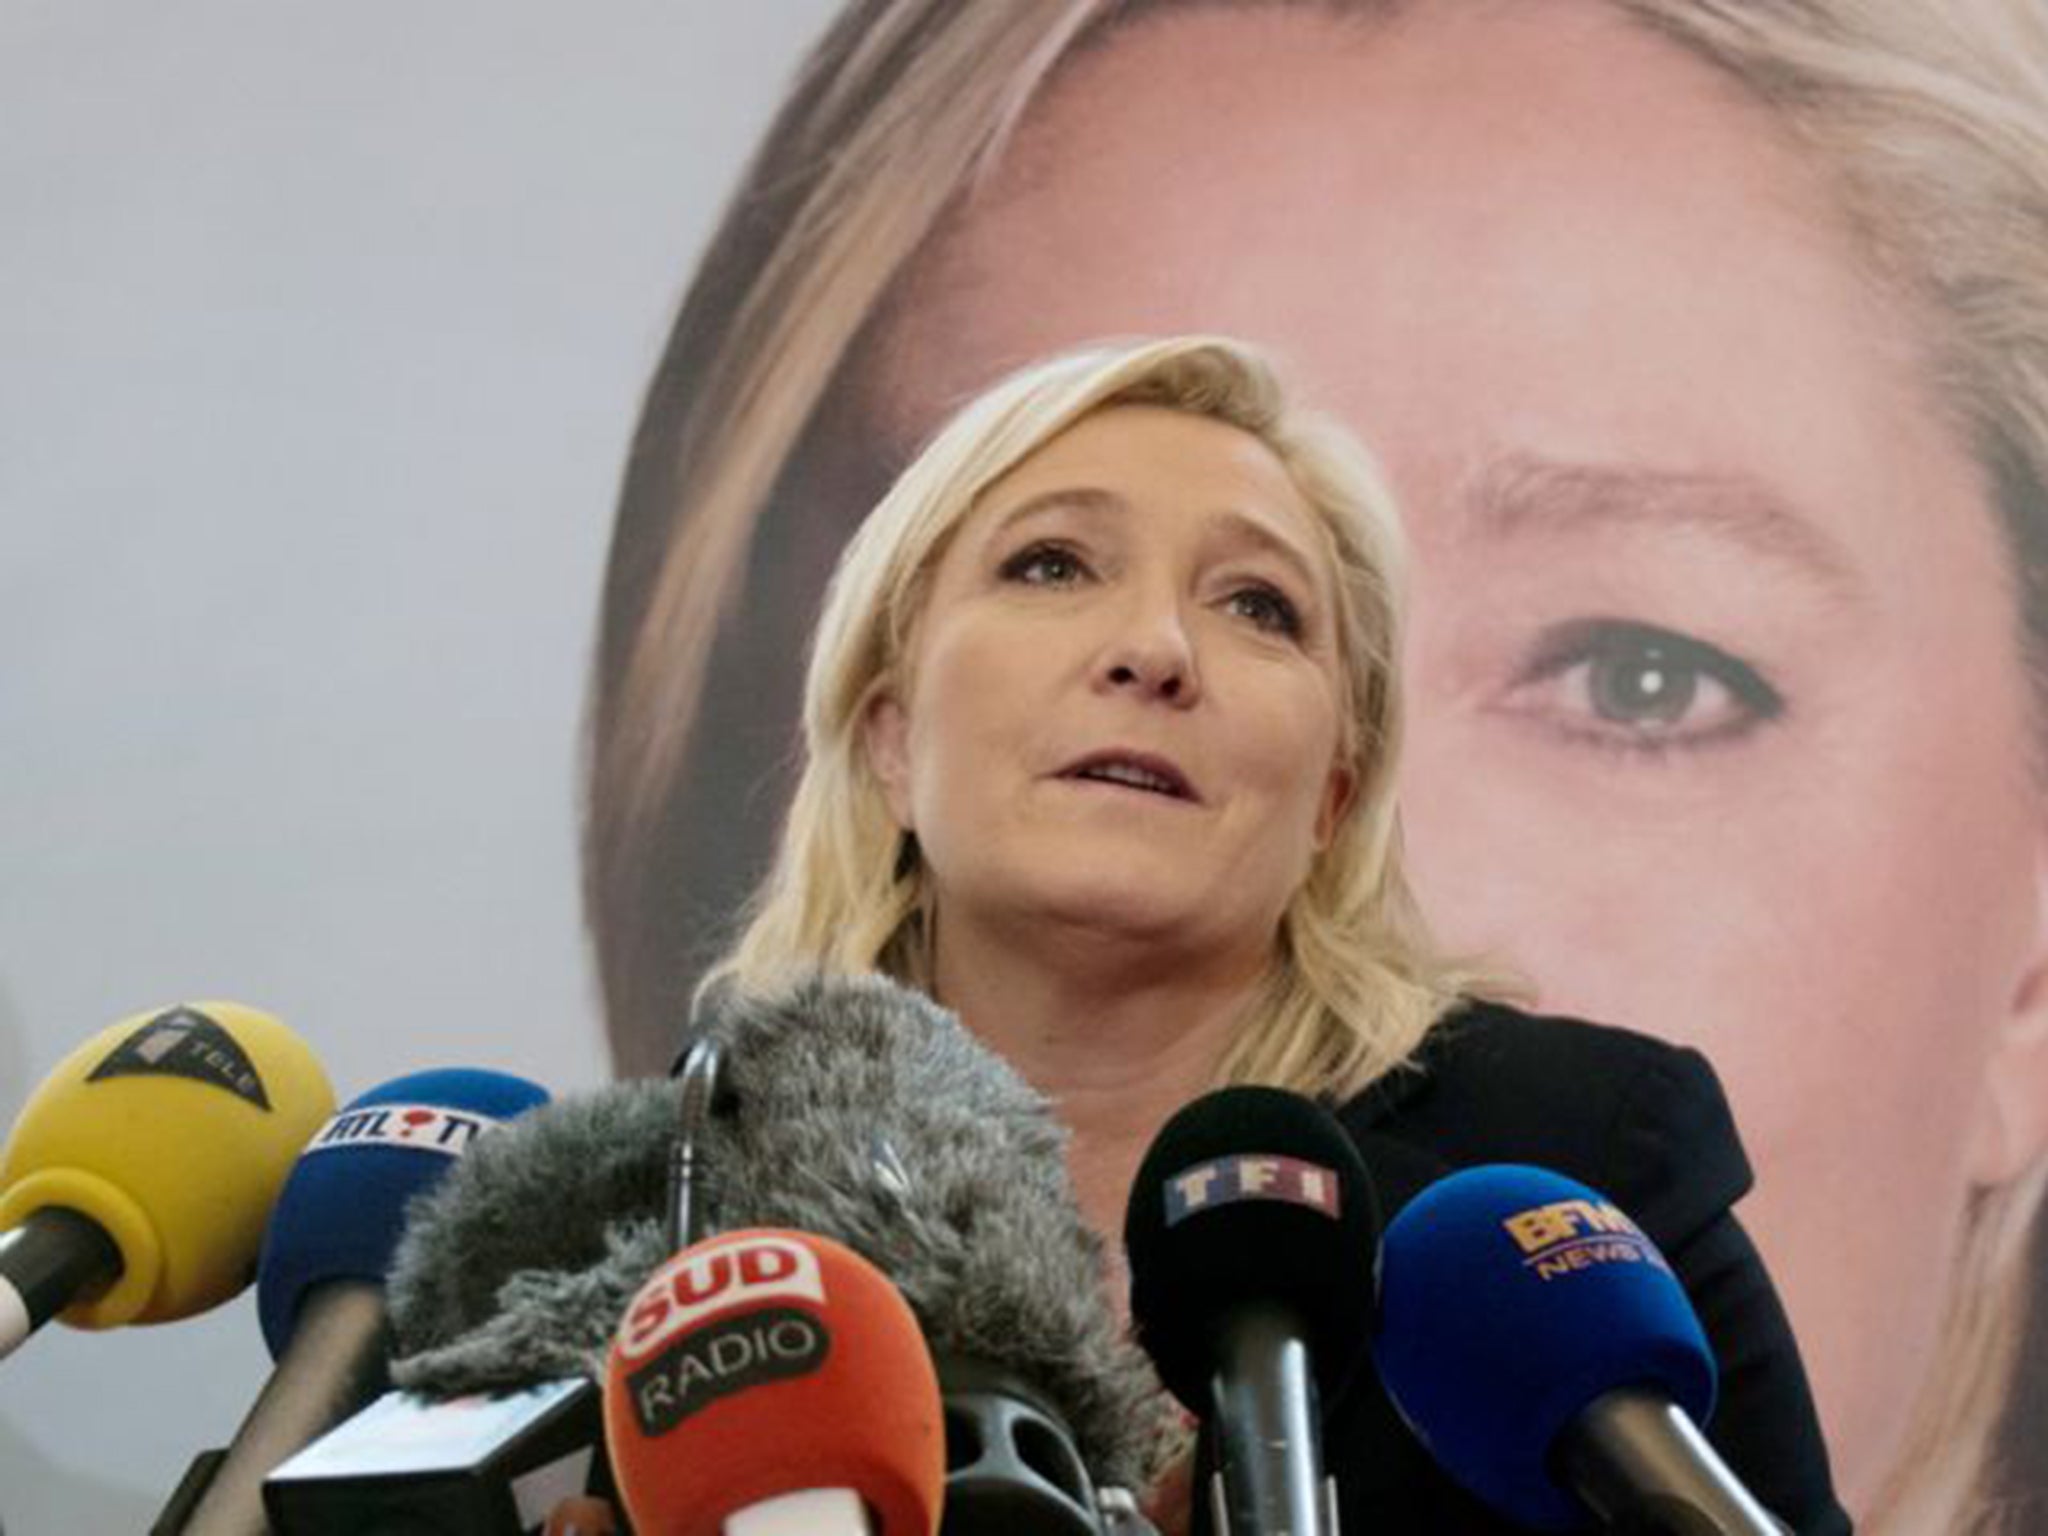 FN leader Marine Le Pen in Lille on Monday after the first round of French regional elections